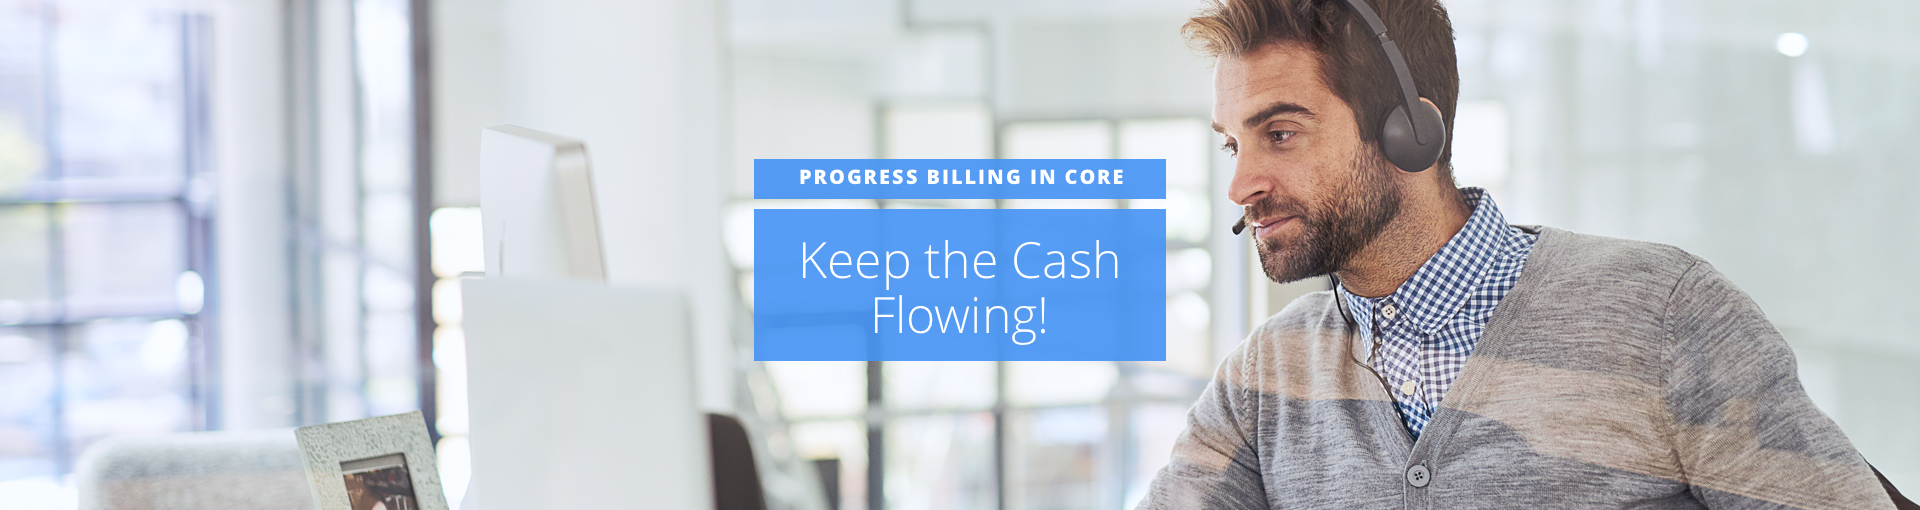 Progress Billing in CORE: Keep the Cash Flowing! Featured Image